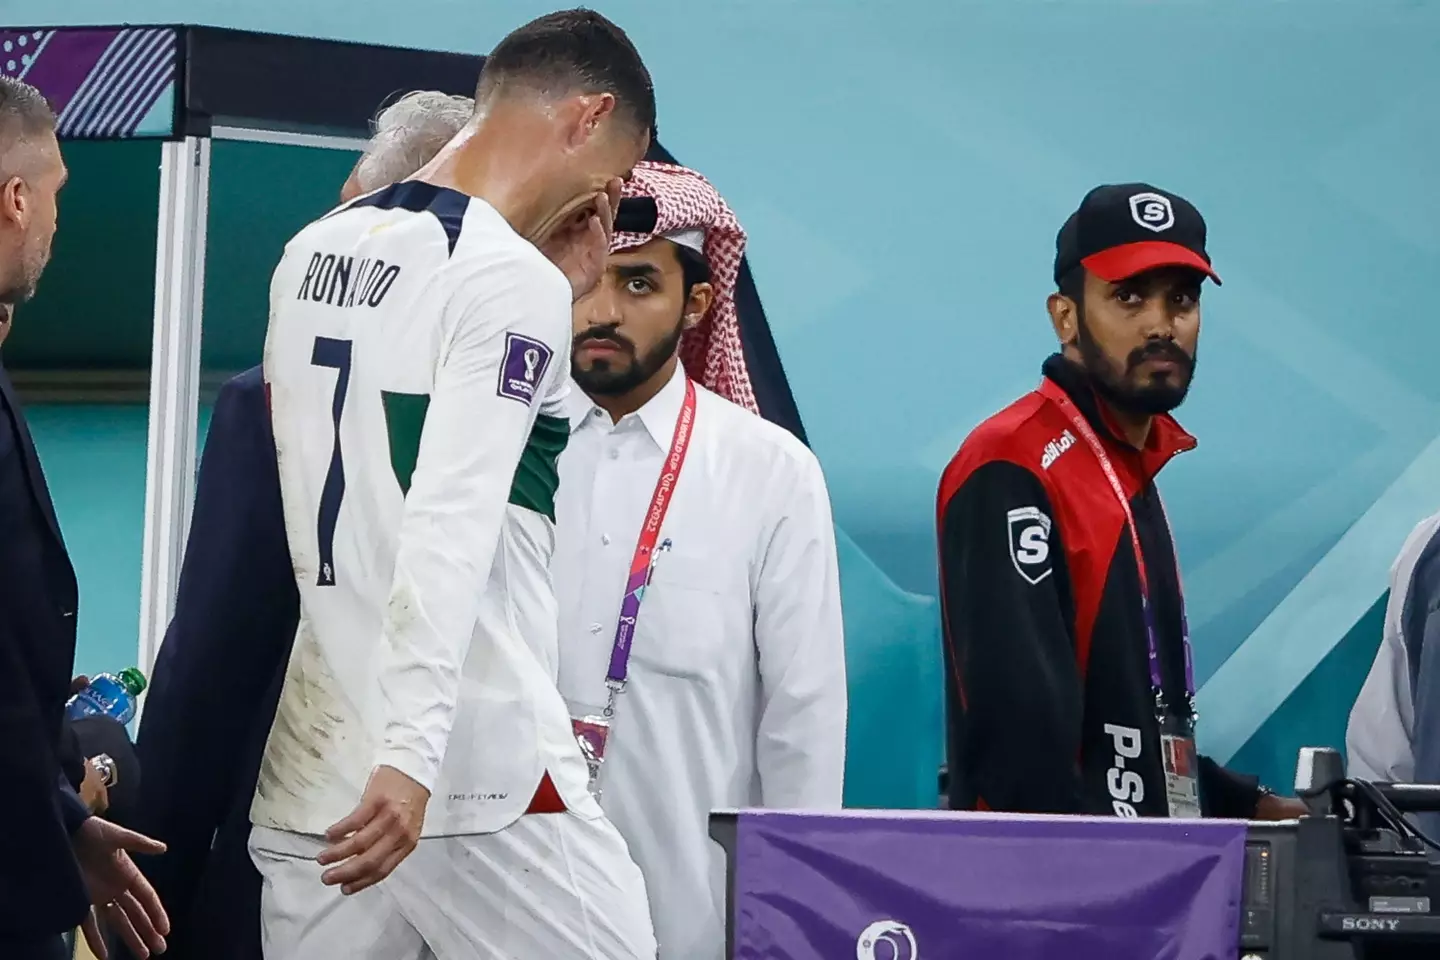 Ronaldo left the pitch in tears after Portugal's World Cup quarter-final defeat to Morocco. Image: Alamy